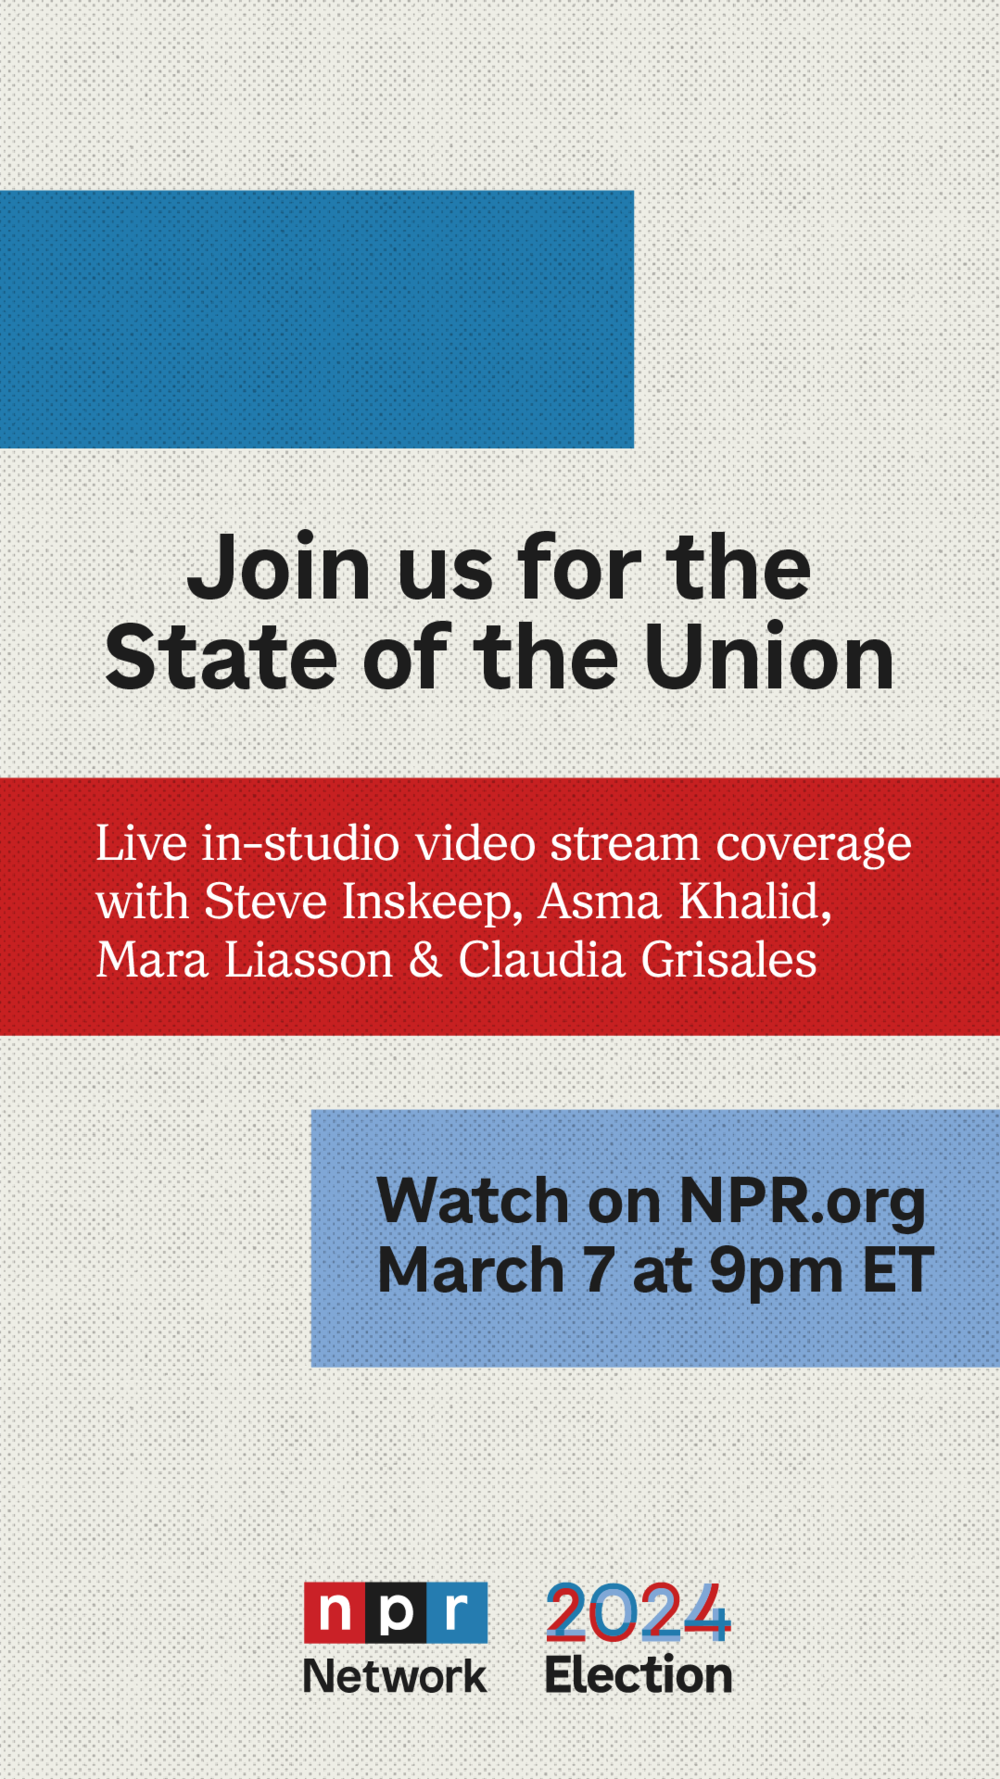 NPR will be hosting live in-studio video stream coverage of the State of the Union on NPR.org on March 7 starting at 9pm ET.